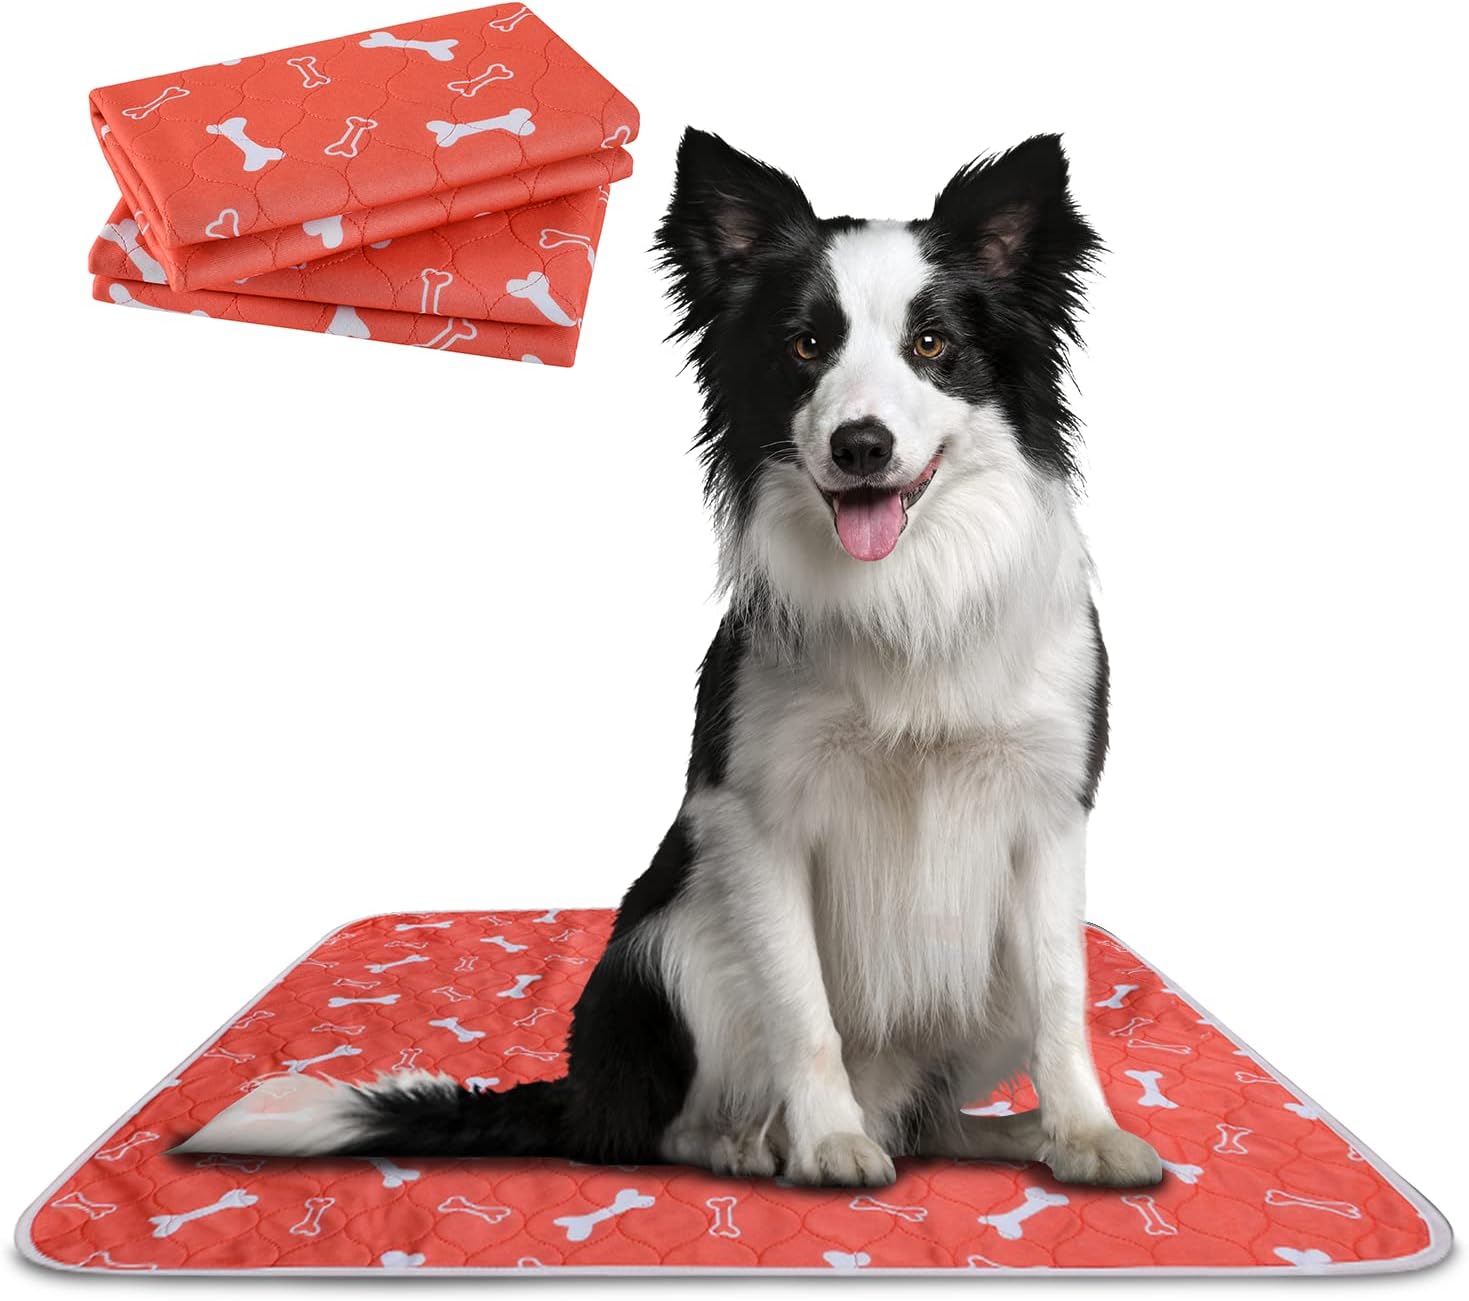 The Proper Pet Washable Pee Pads for Dogs